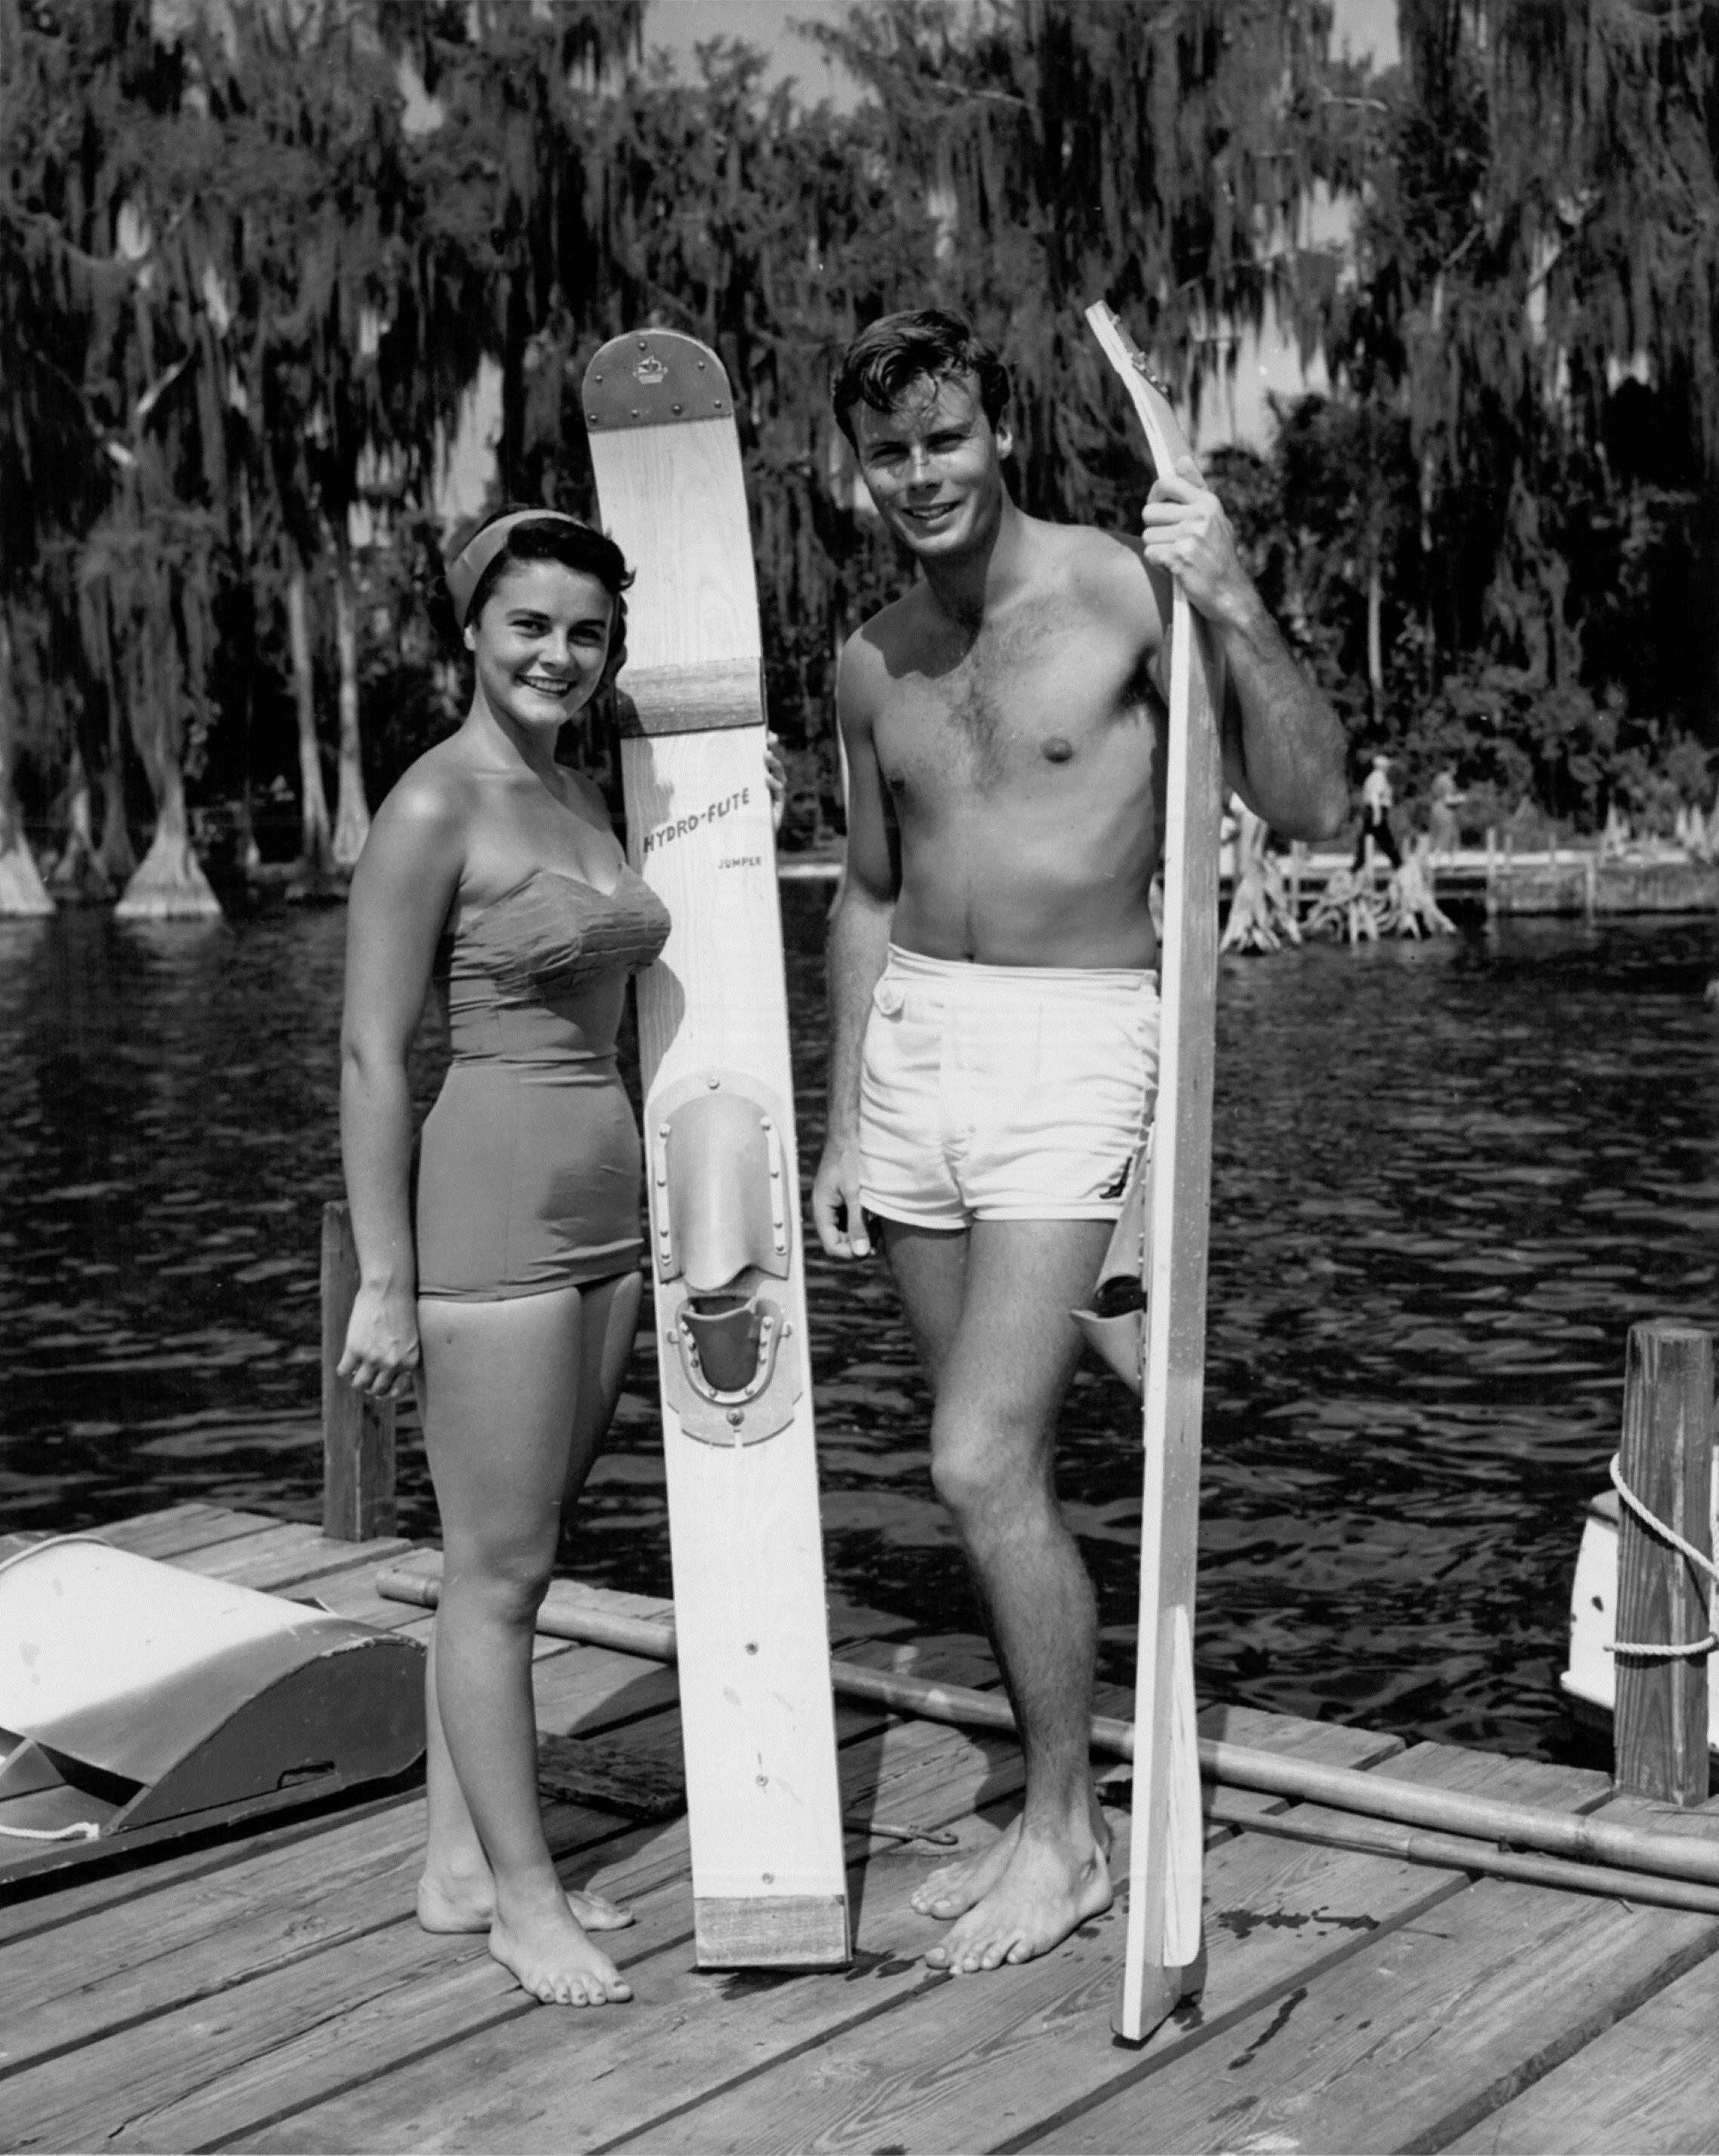  Above: Feb./March 1955, Cypress Gardens, Fla.  “Not only do I have fond memories of Bob Francis but I have fonder memories of the weekend with Bob and the girls at Cypress Gardens in Florida.”  Source: Joe Hyams, letter, June 8, 1992  Below:  St. Pe